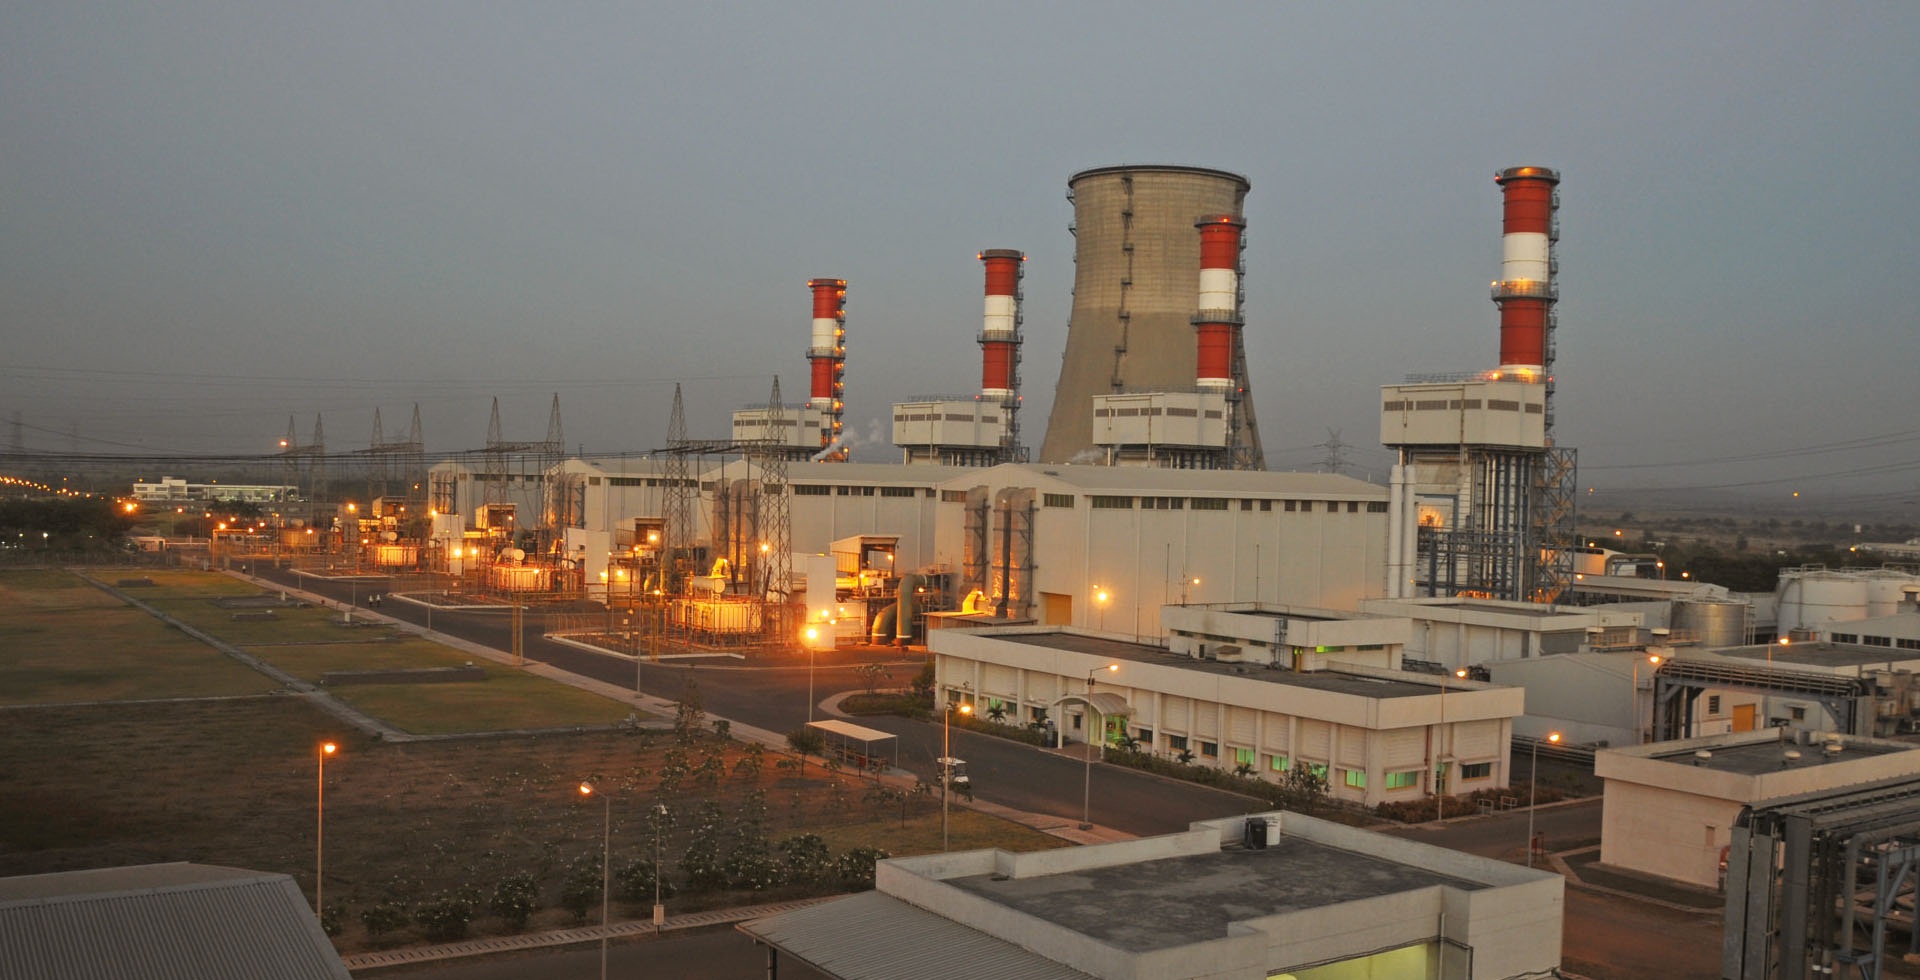 India's Torrent Power to buy five LNG cargoes for 2019